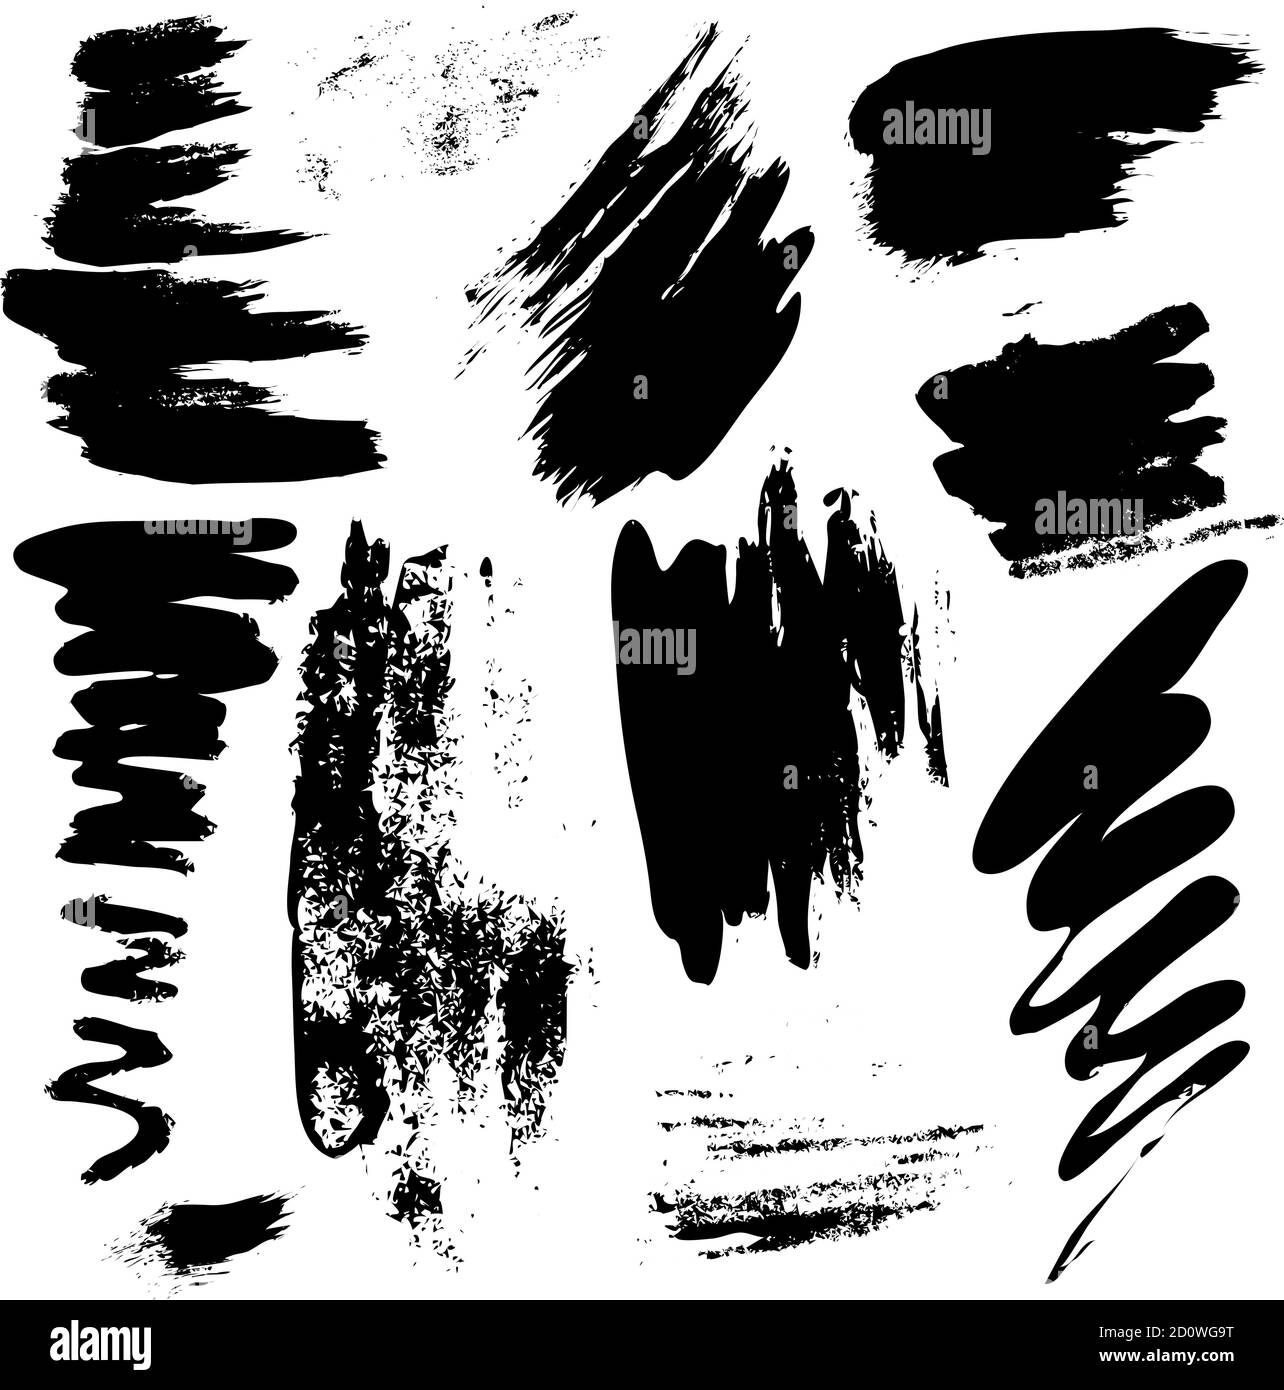 Set of black paint, ink splatters, grunge texture, brush strokes, brushes, blots, drops, splashes. Vector collection dirty artistic design elements Stock Vector